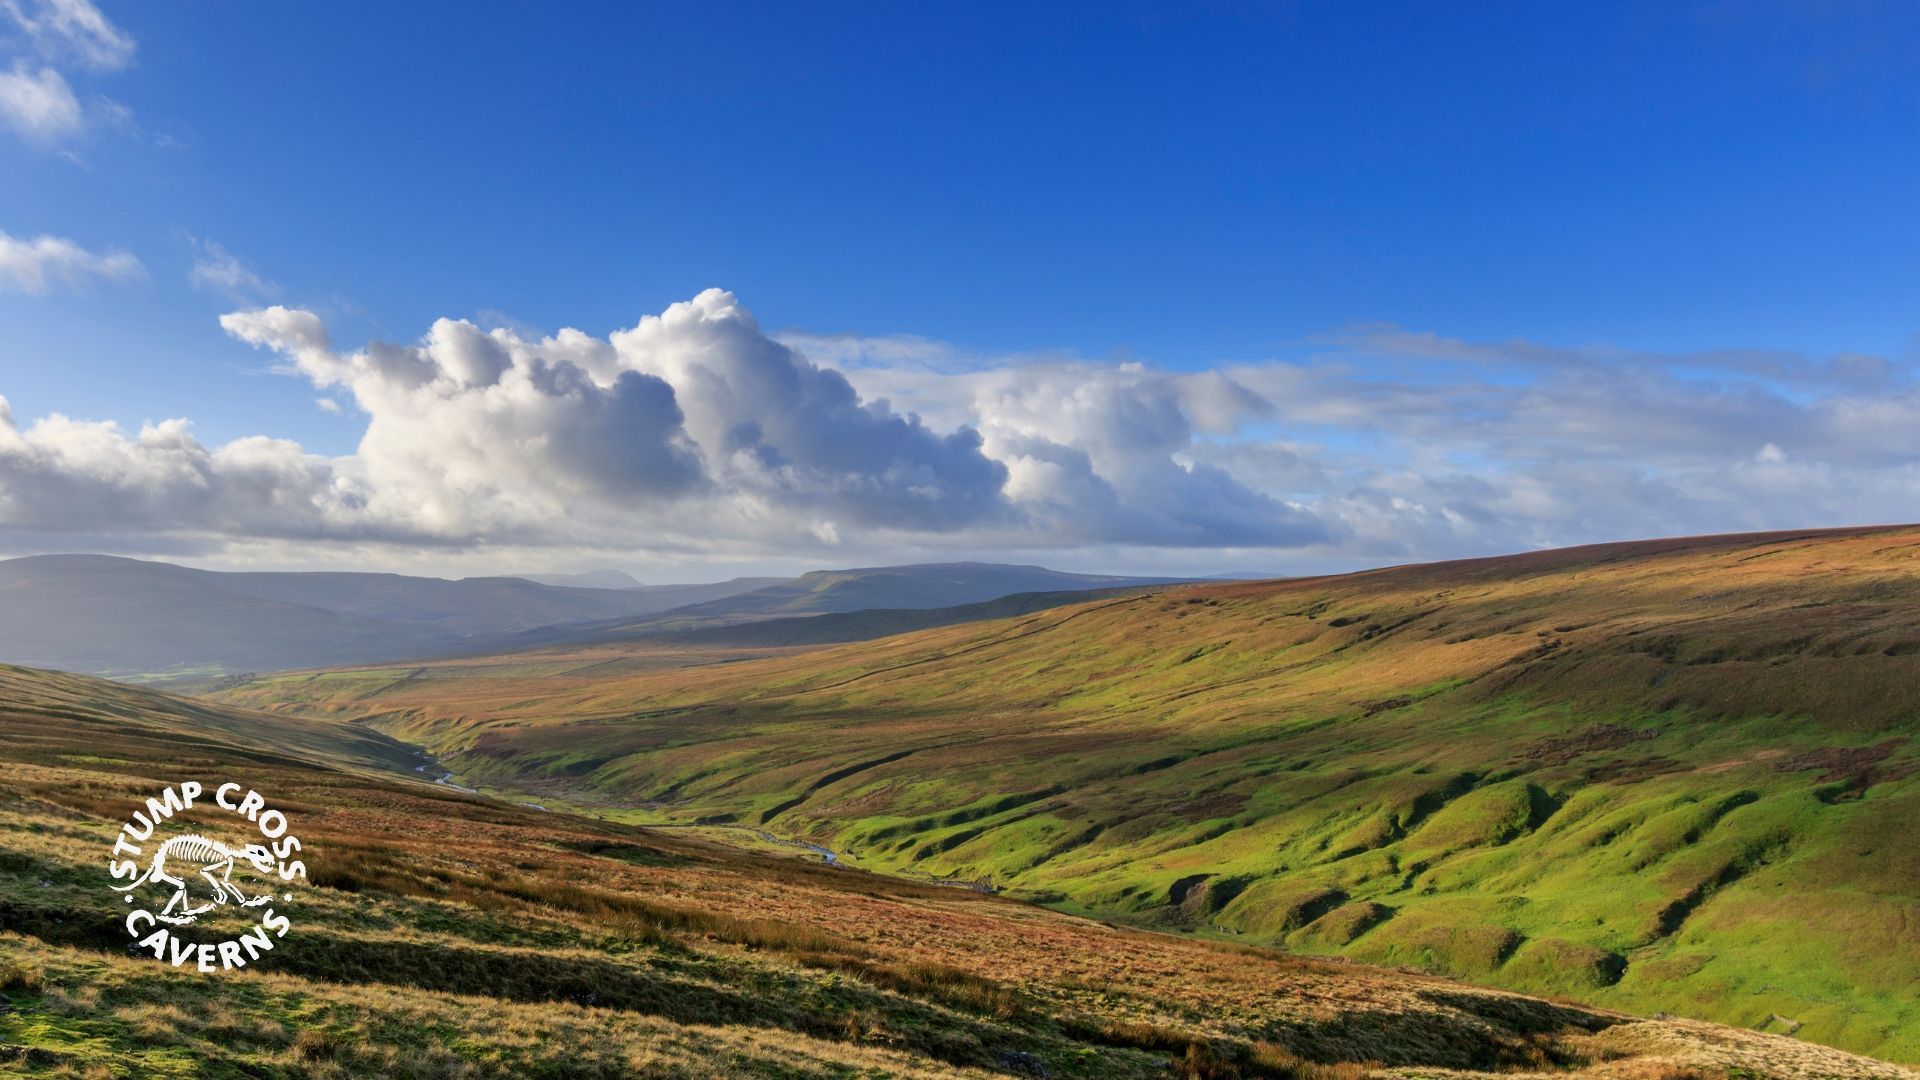 It's amazing what you can see in a day. Get some inspiration with our 24-hour Yorkshire Dales 